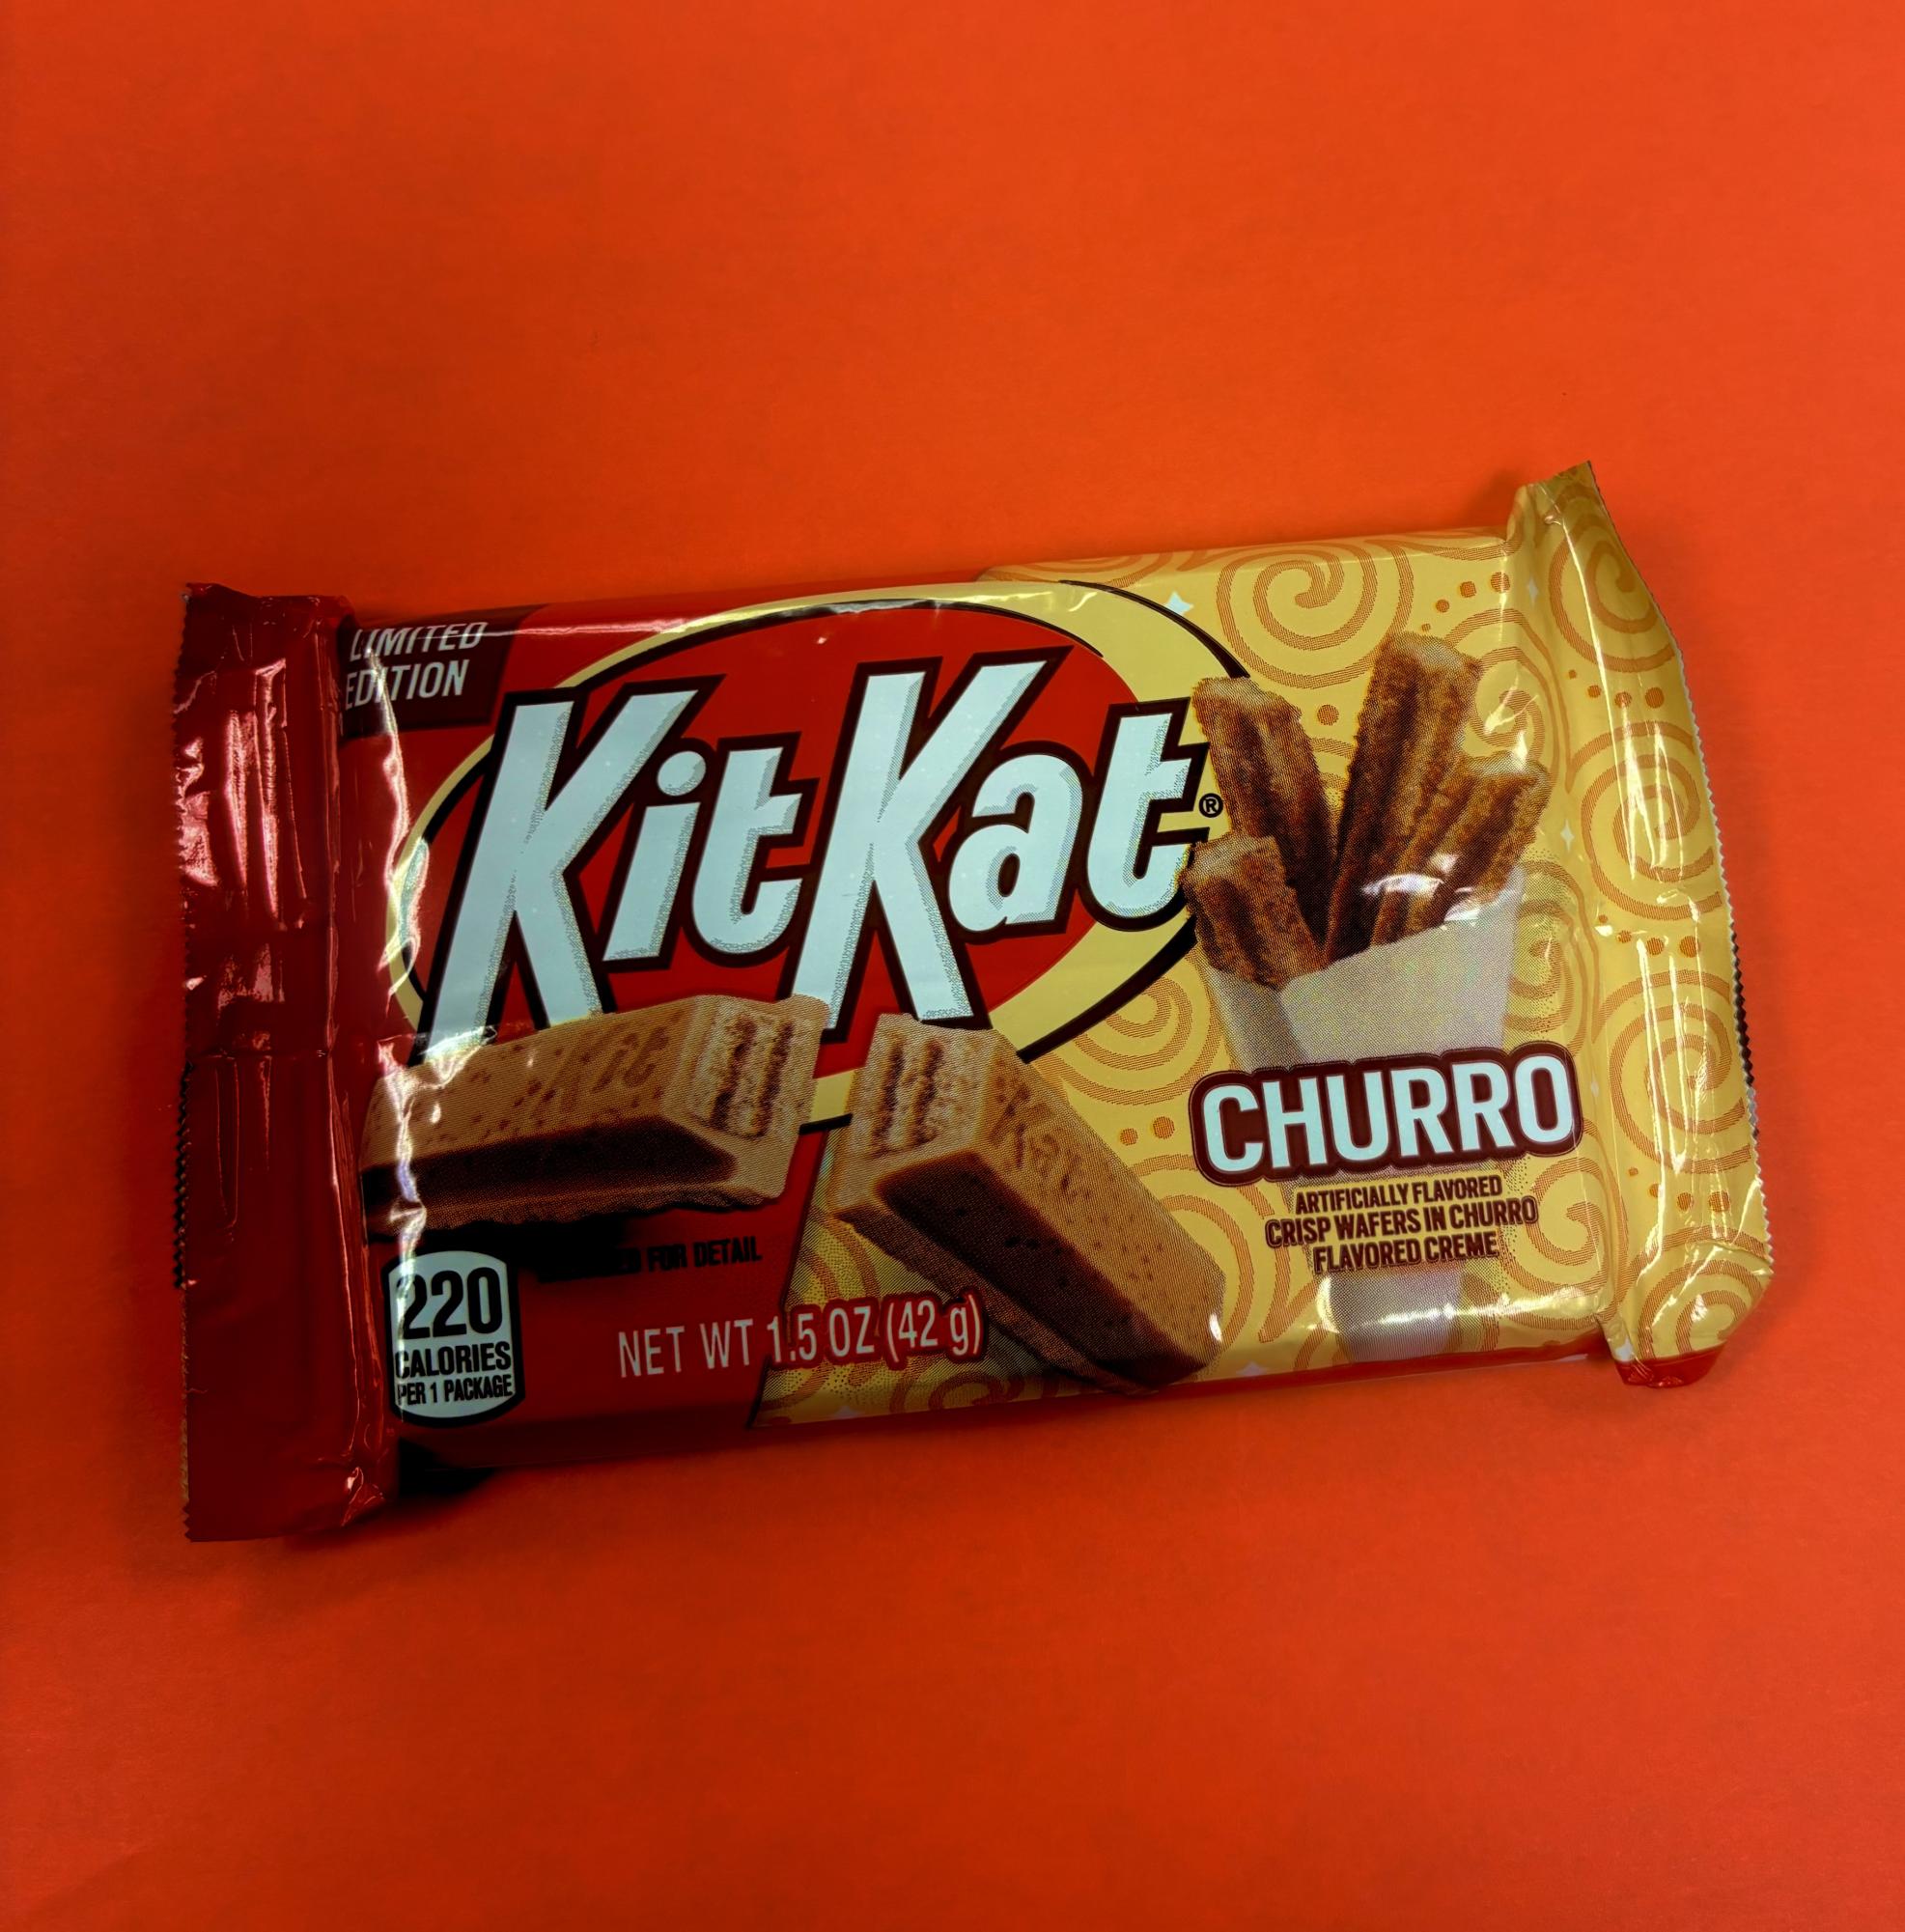 Amid this revolutionary era, KitKat dropped their Limited Edition Churro Flavored Bar. Aiming to defy expectations, this bar was designed to offer a new twist on the traditional churro flavor.